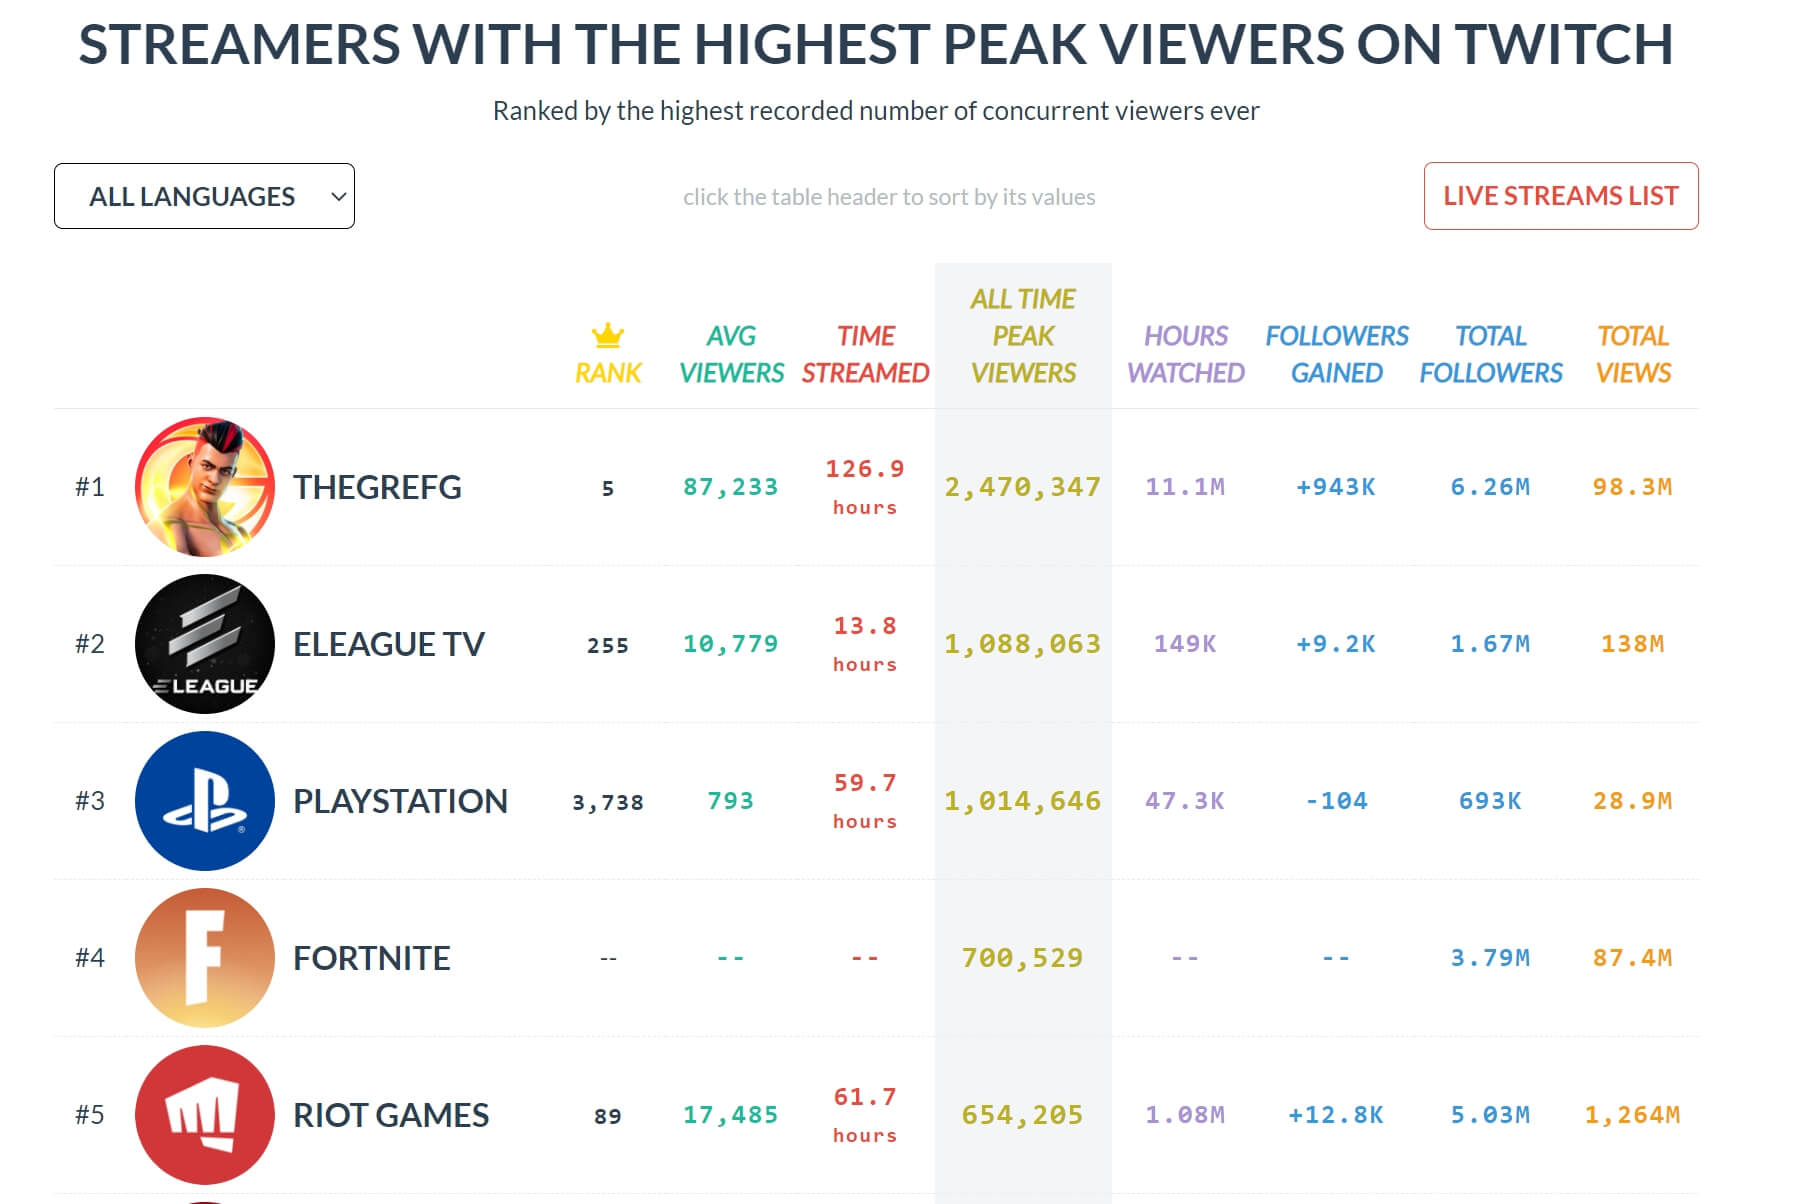 Twitch streamer TheGrefg sets new record of 2.4 million concurrent viewers  - Digital TV Europe